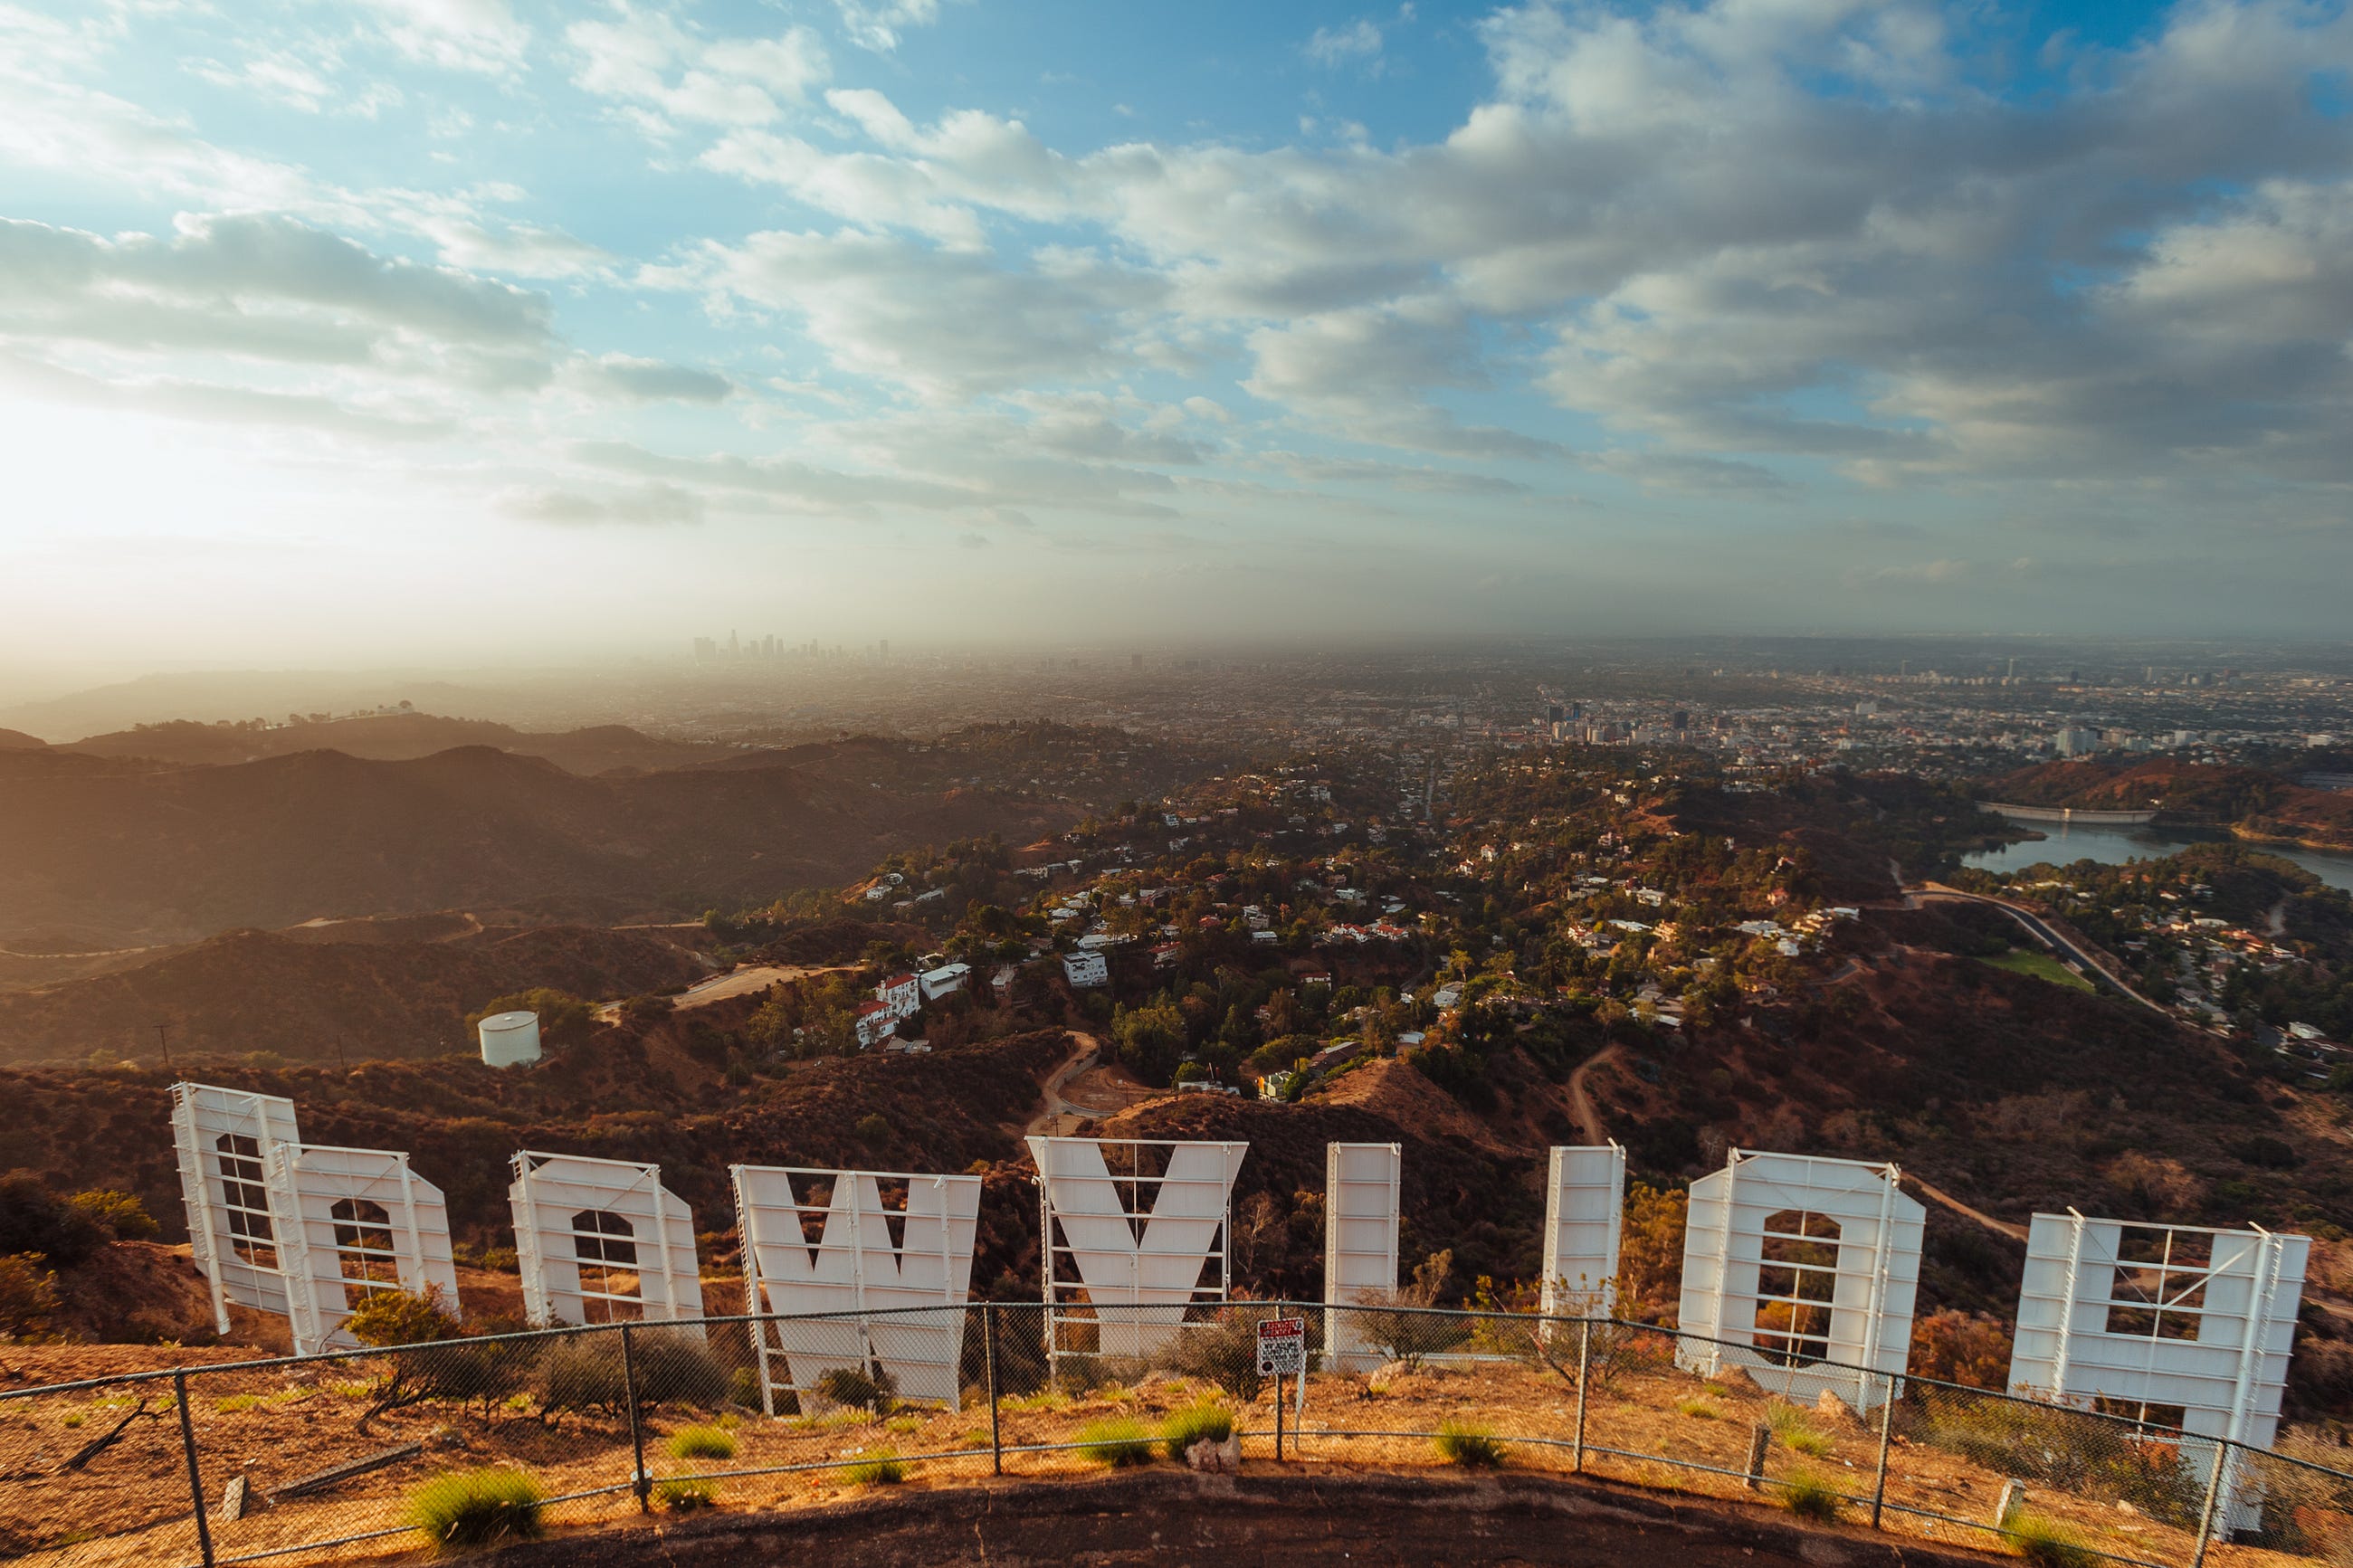 Hollywood Is Being Decentralized, and the Entrepreneurial Opportunities Are Enormous